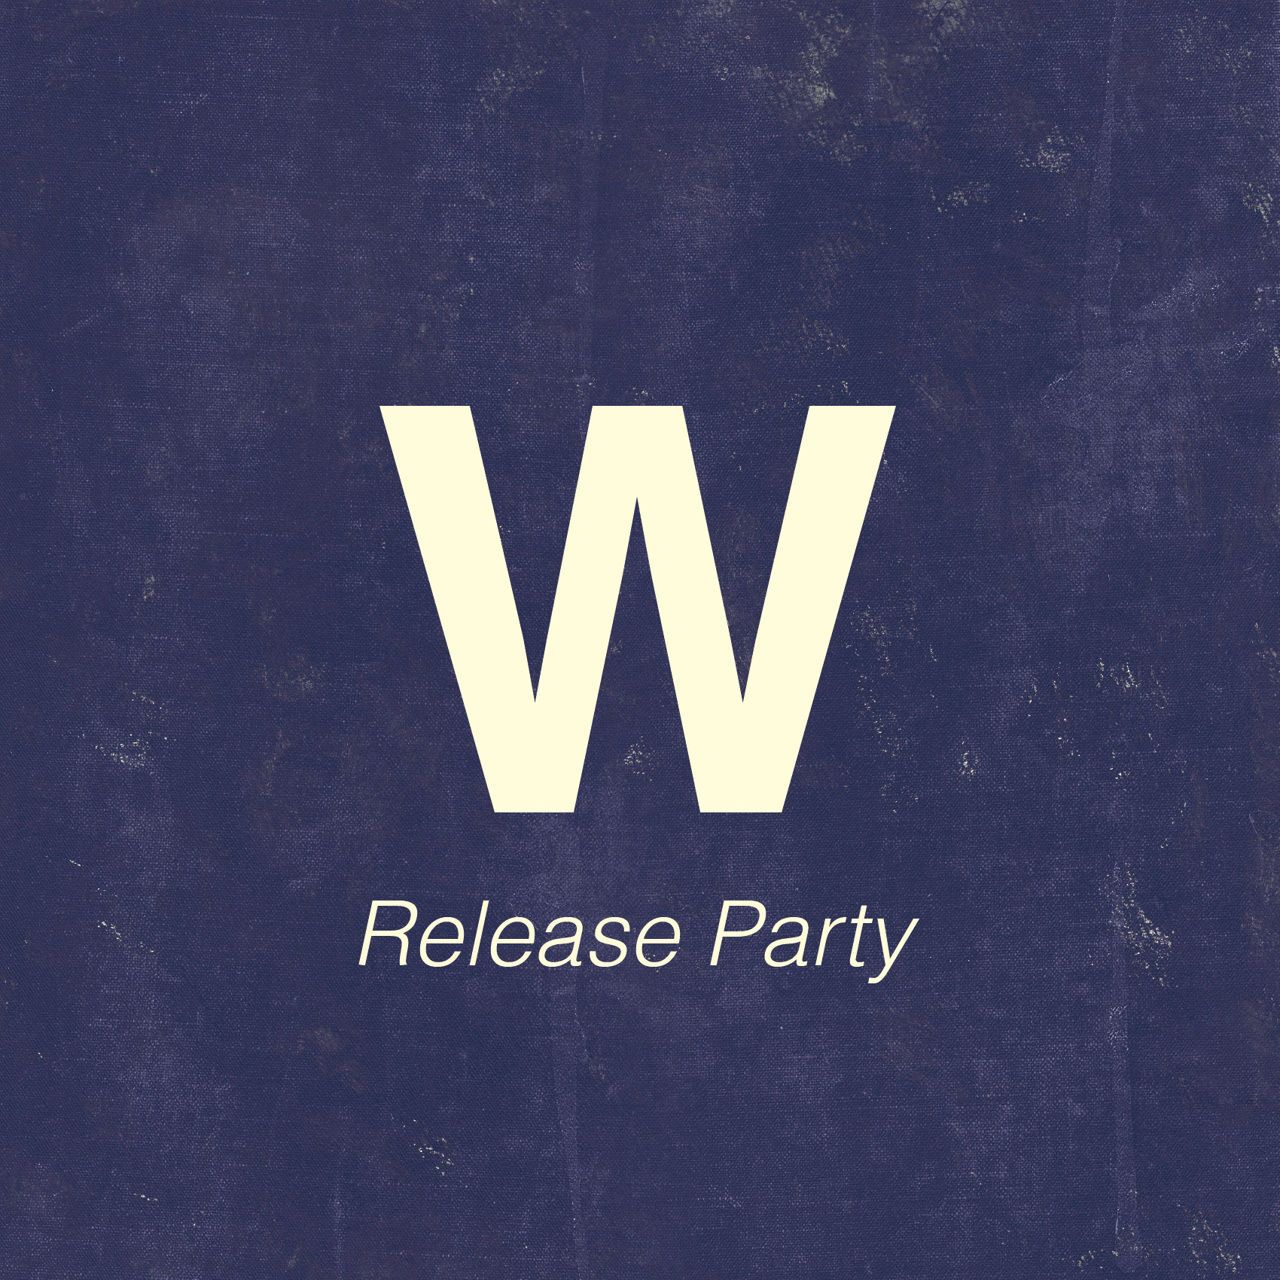 "W" Release Party